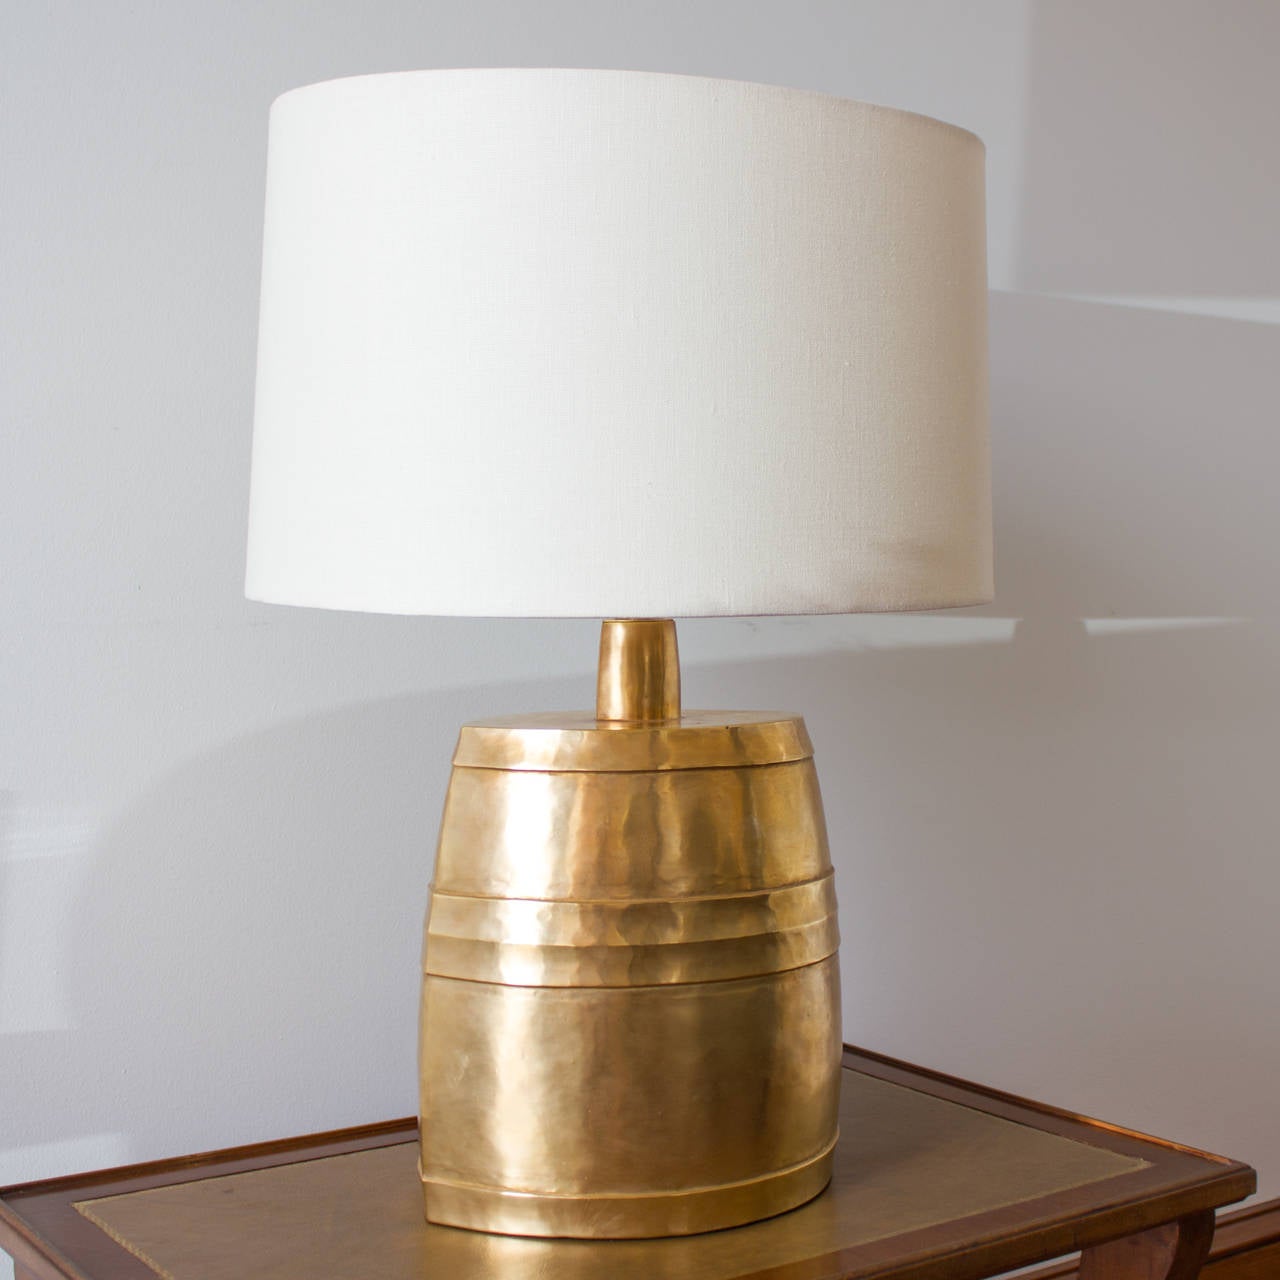 Repoussé Bell Lamp in Gold